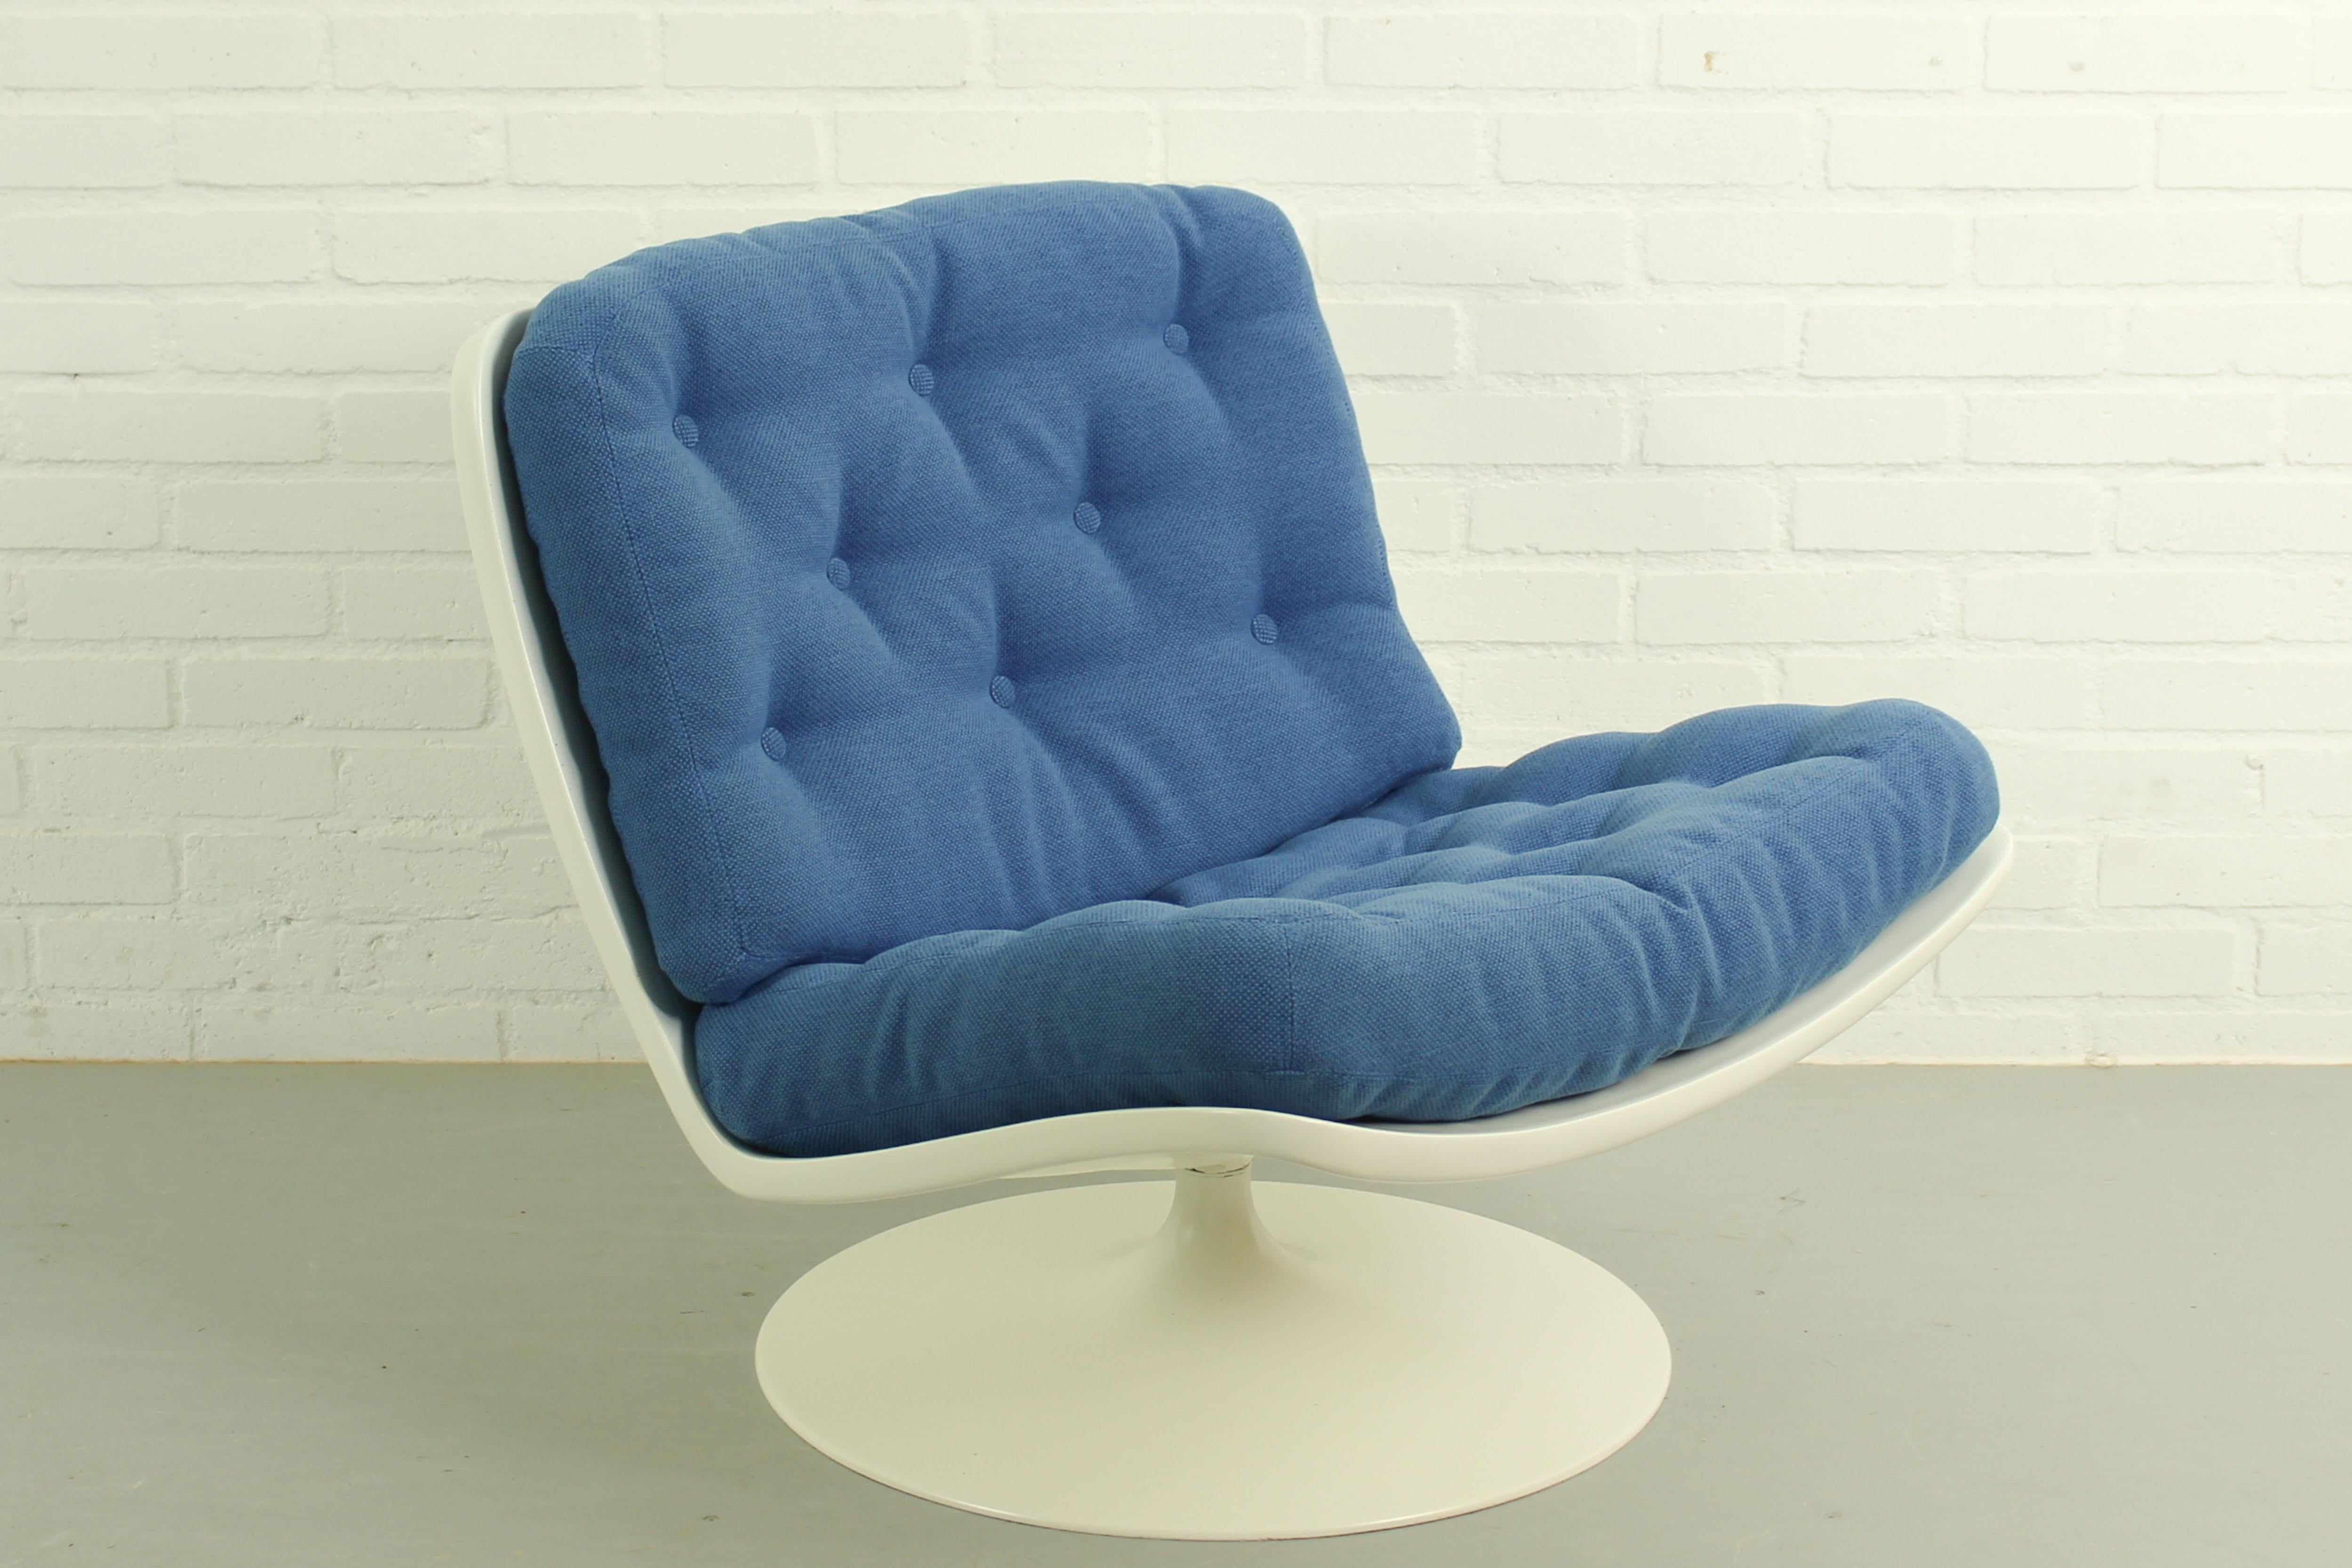 This mid-century F976 lounge chair was designed by Geoffrey Harcourt and manufactured for Artifort in the Netherlands during 1968. The chair features a polyesther base. It is reupholsterd in beautiful new mid century Kvadrat Hallingdal fabric.